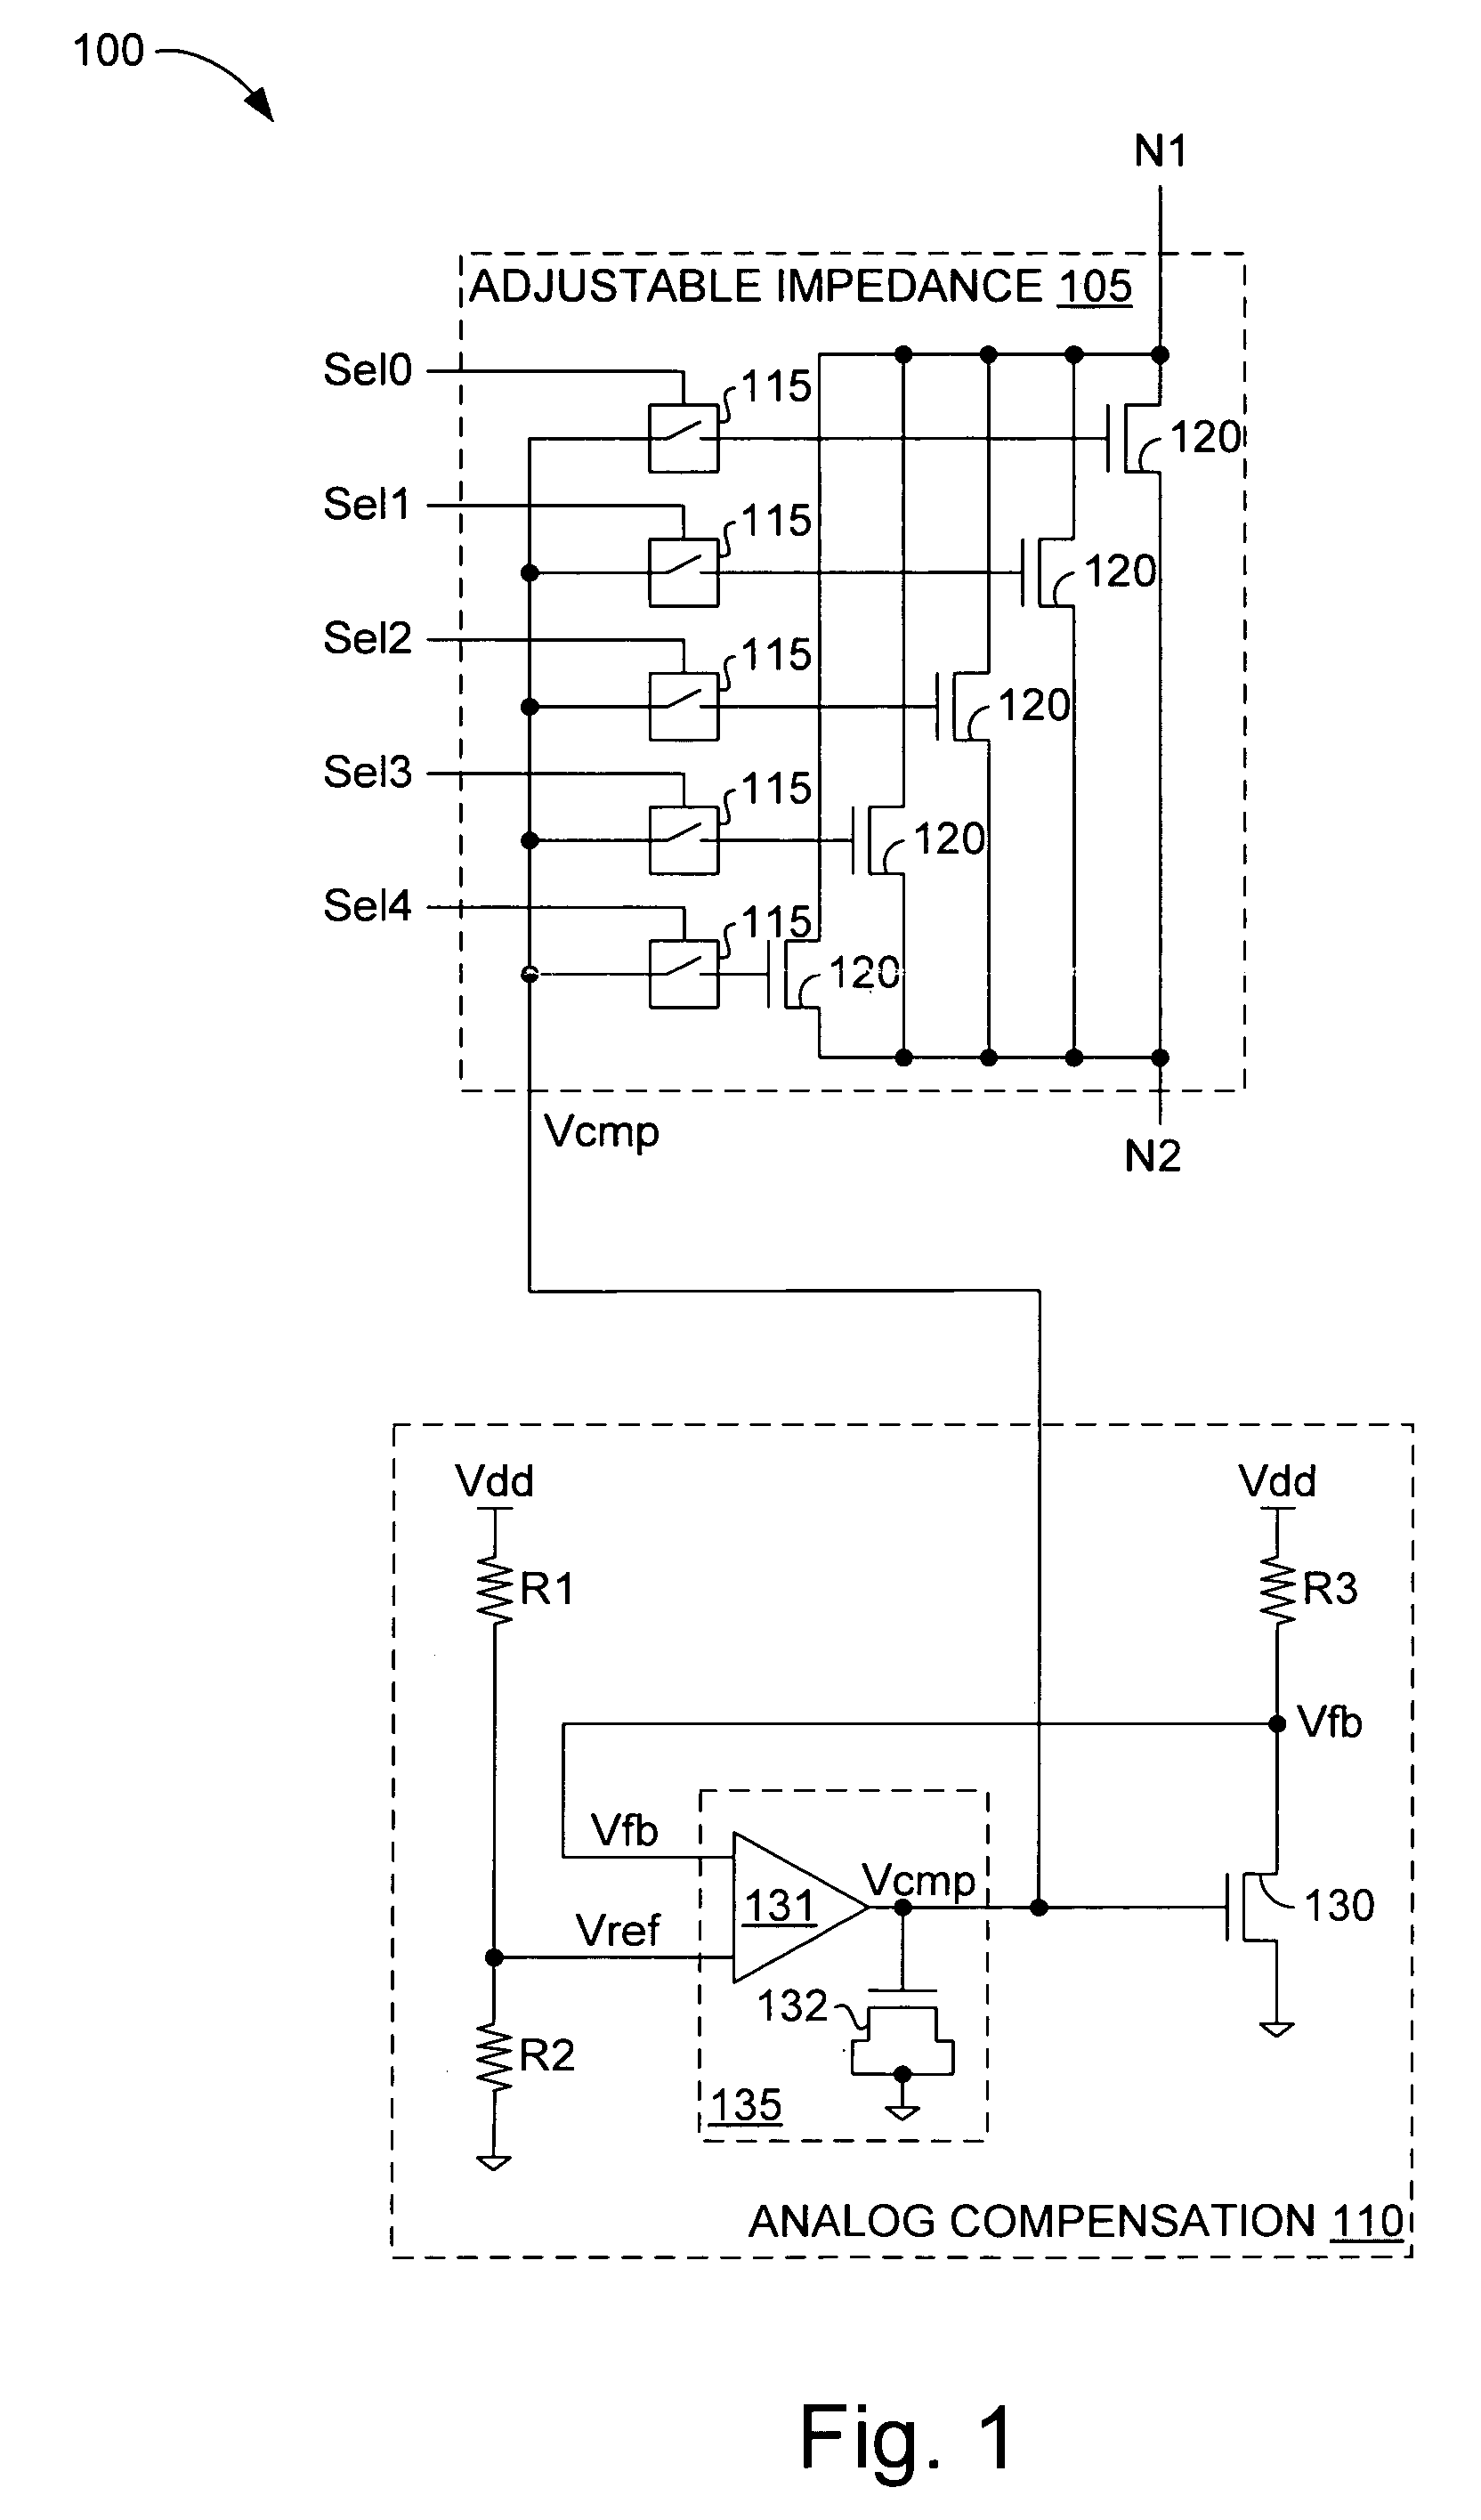 Systems and methods for controlling termination resistance values for a plurality of communication channels